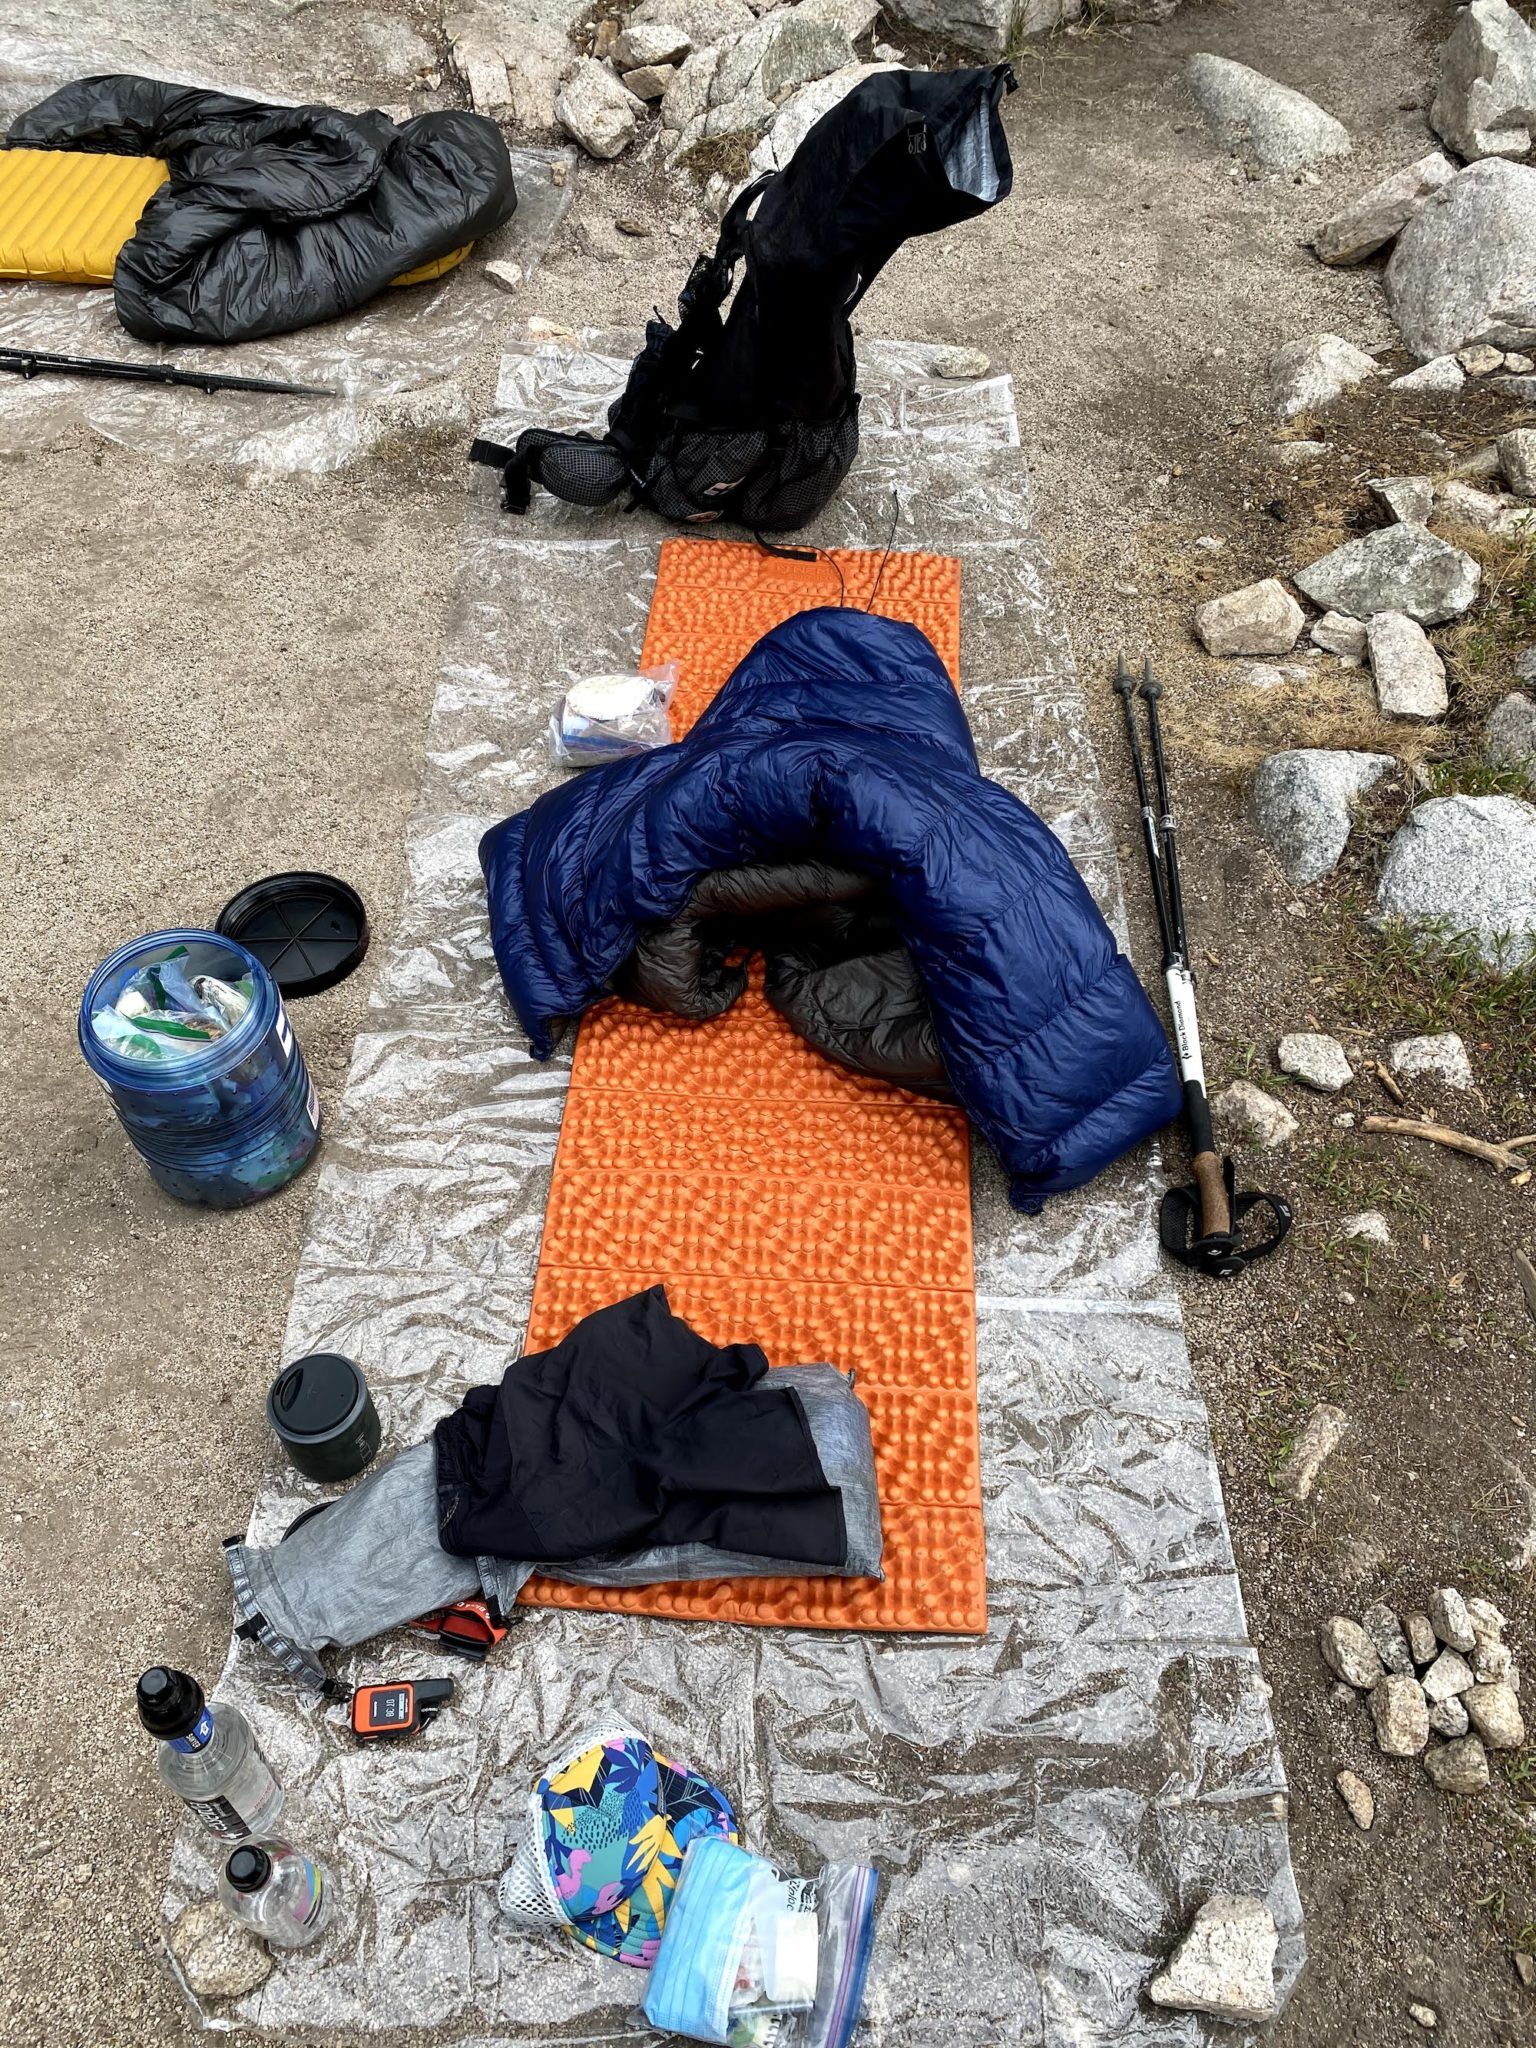 A ground sheet with a sleeping pad and quilt. There is a small pile of rocks next to the sleep setup.